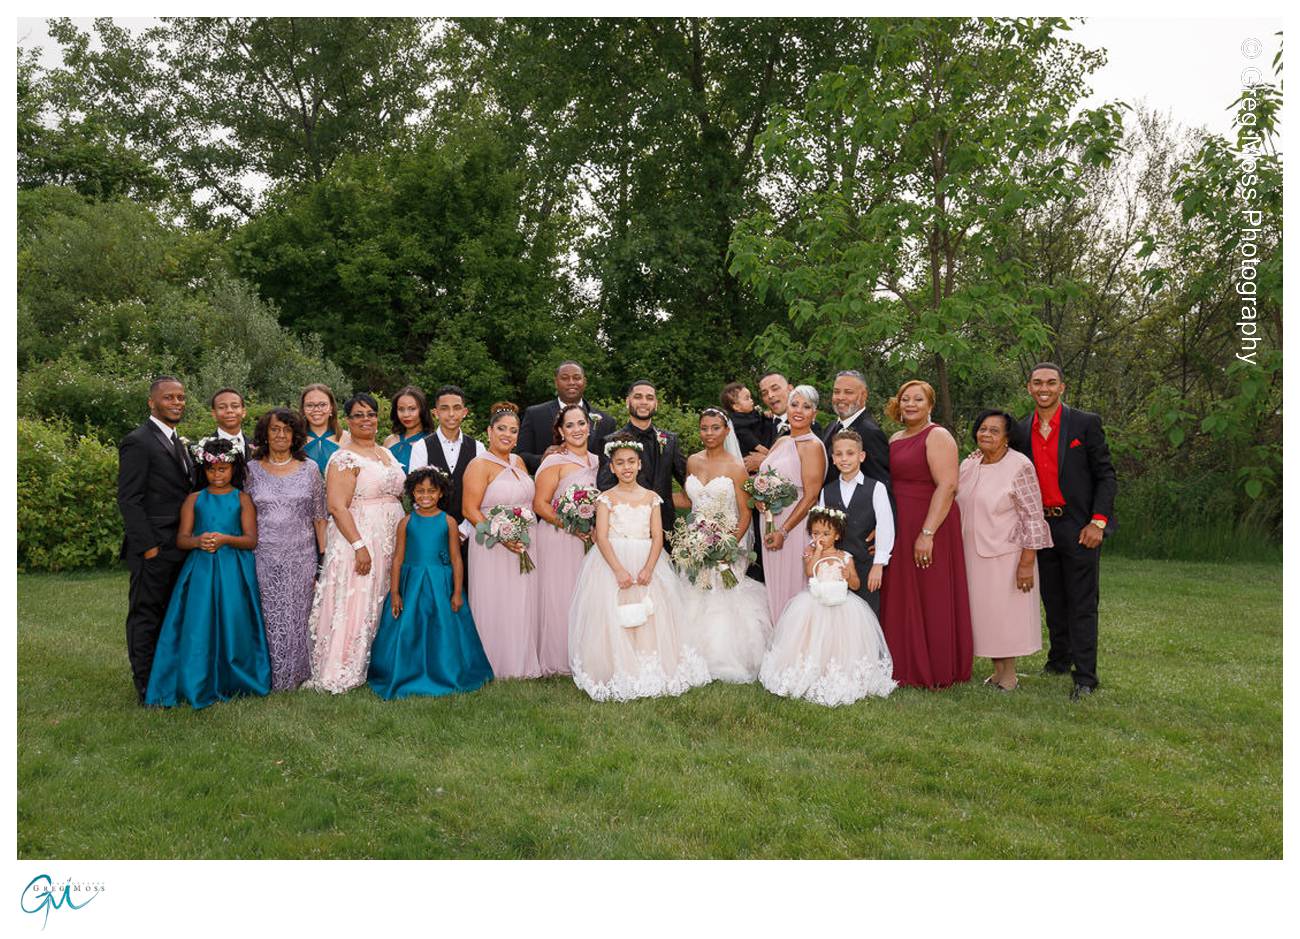 Large family photo at wedding in grassy area